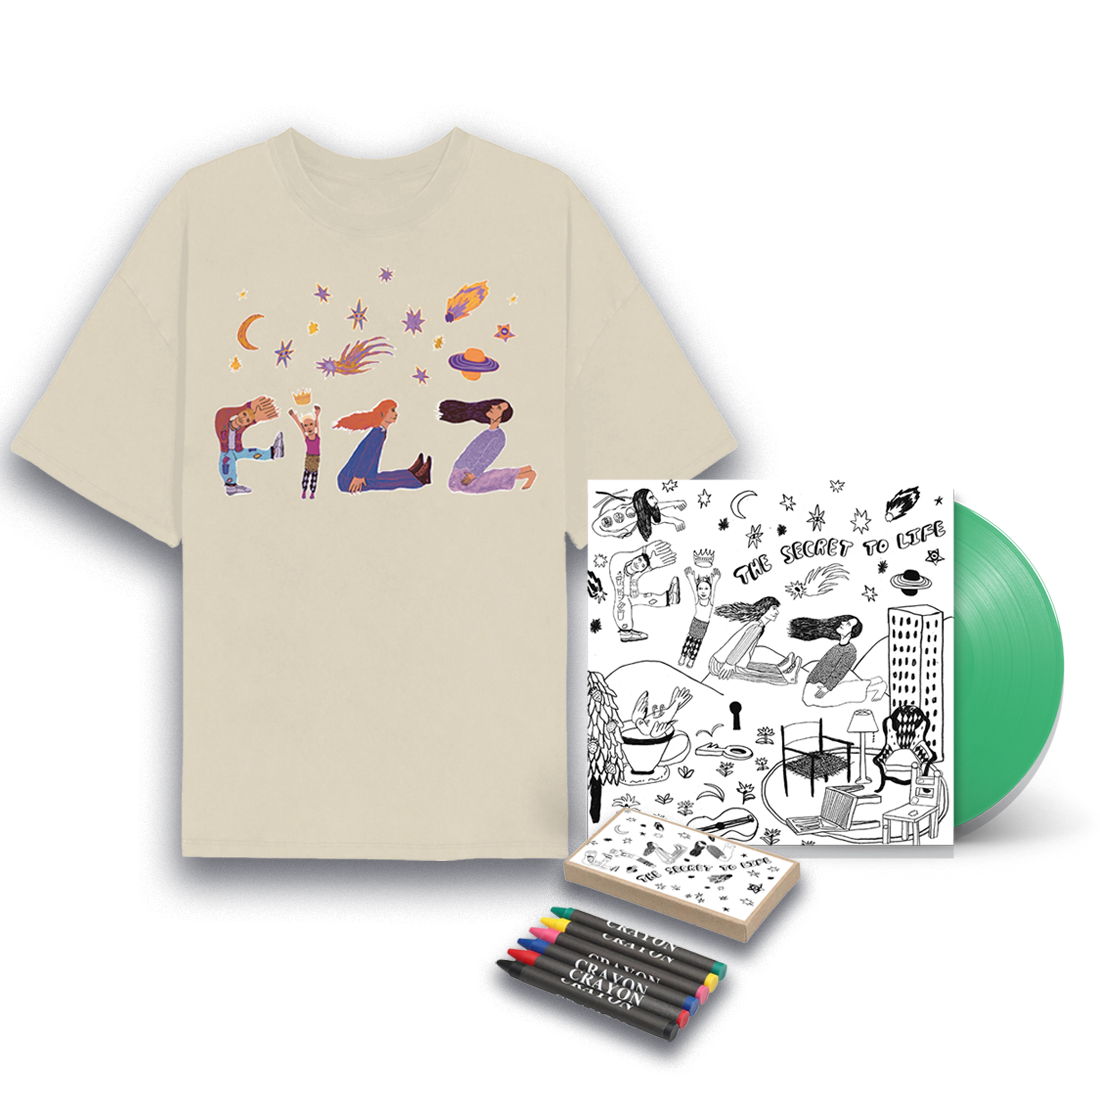 Exclusive The Secret to Life "Colour in" LP, FIZZ Natural Tee + crayons!